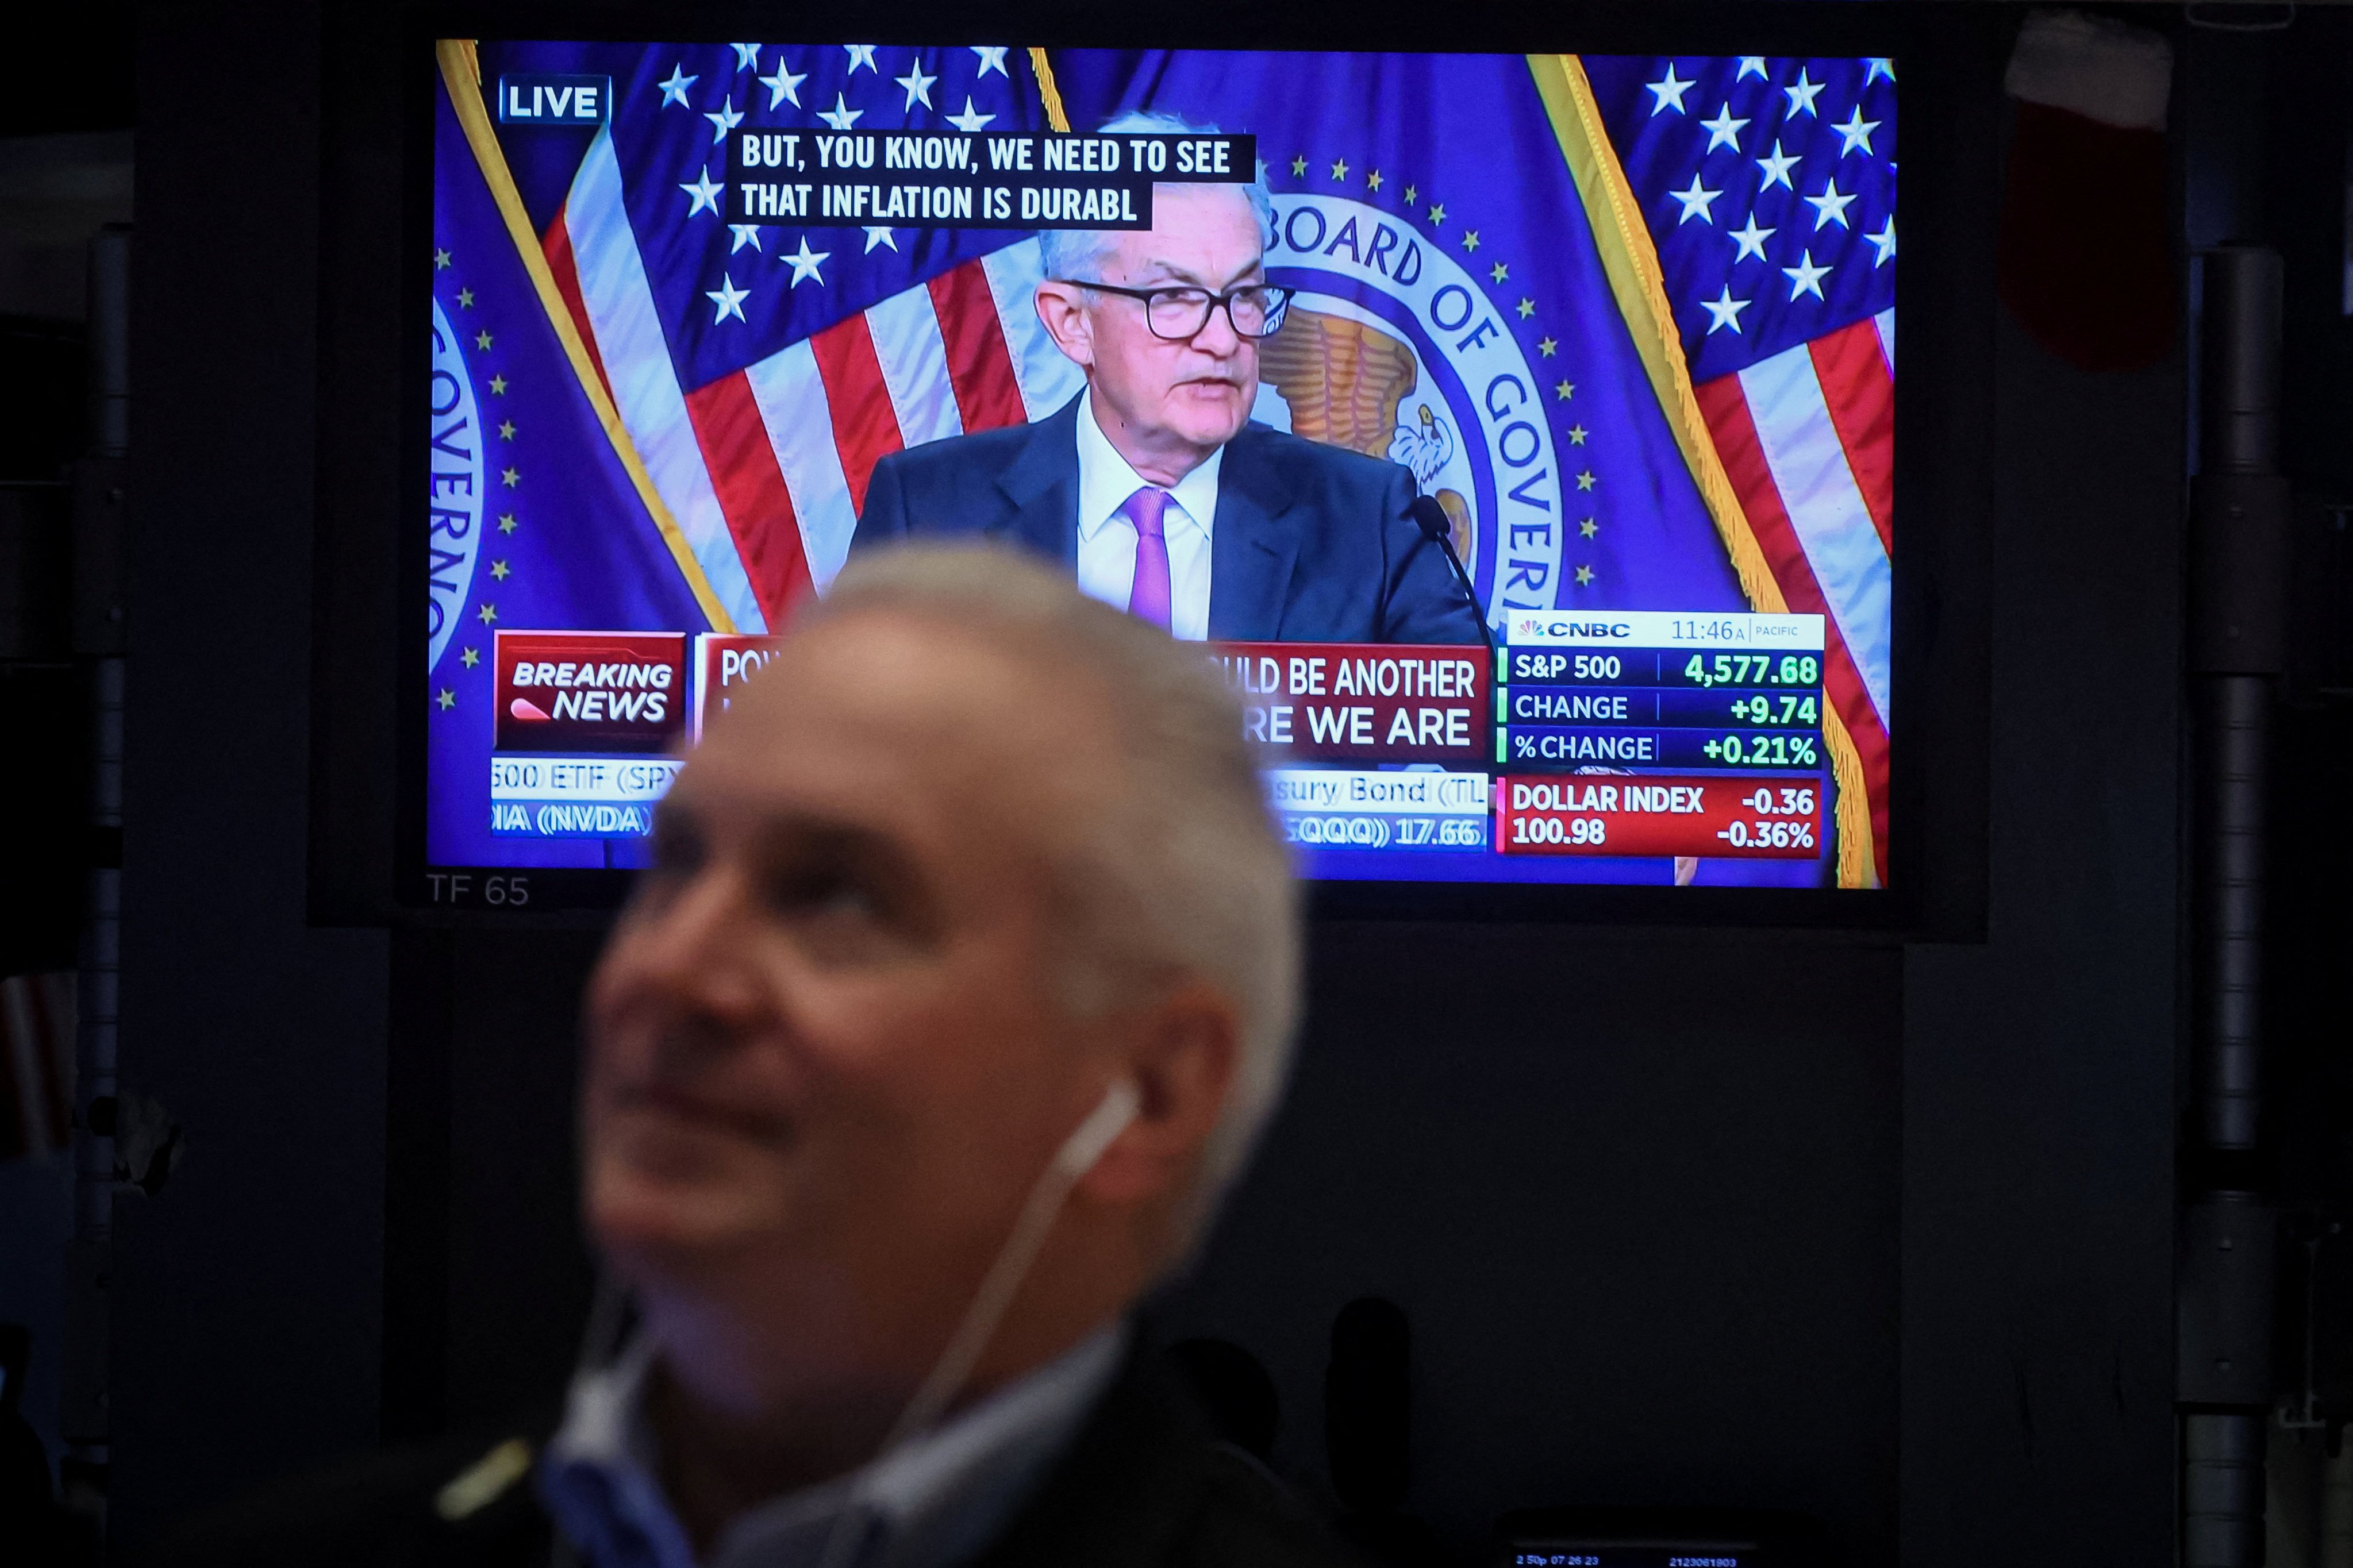 A trader works  on the floor of the New York Stock Exchange on July 26, as a screen displays a news conference by US Federal Reserve chairman Jerome Powell following the Fed rate announcement. Photo: Reuters